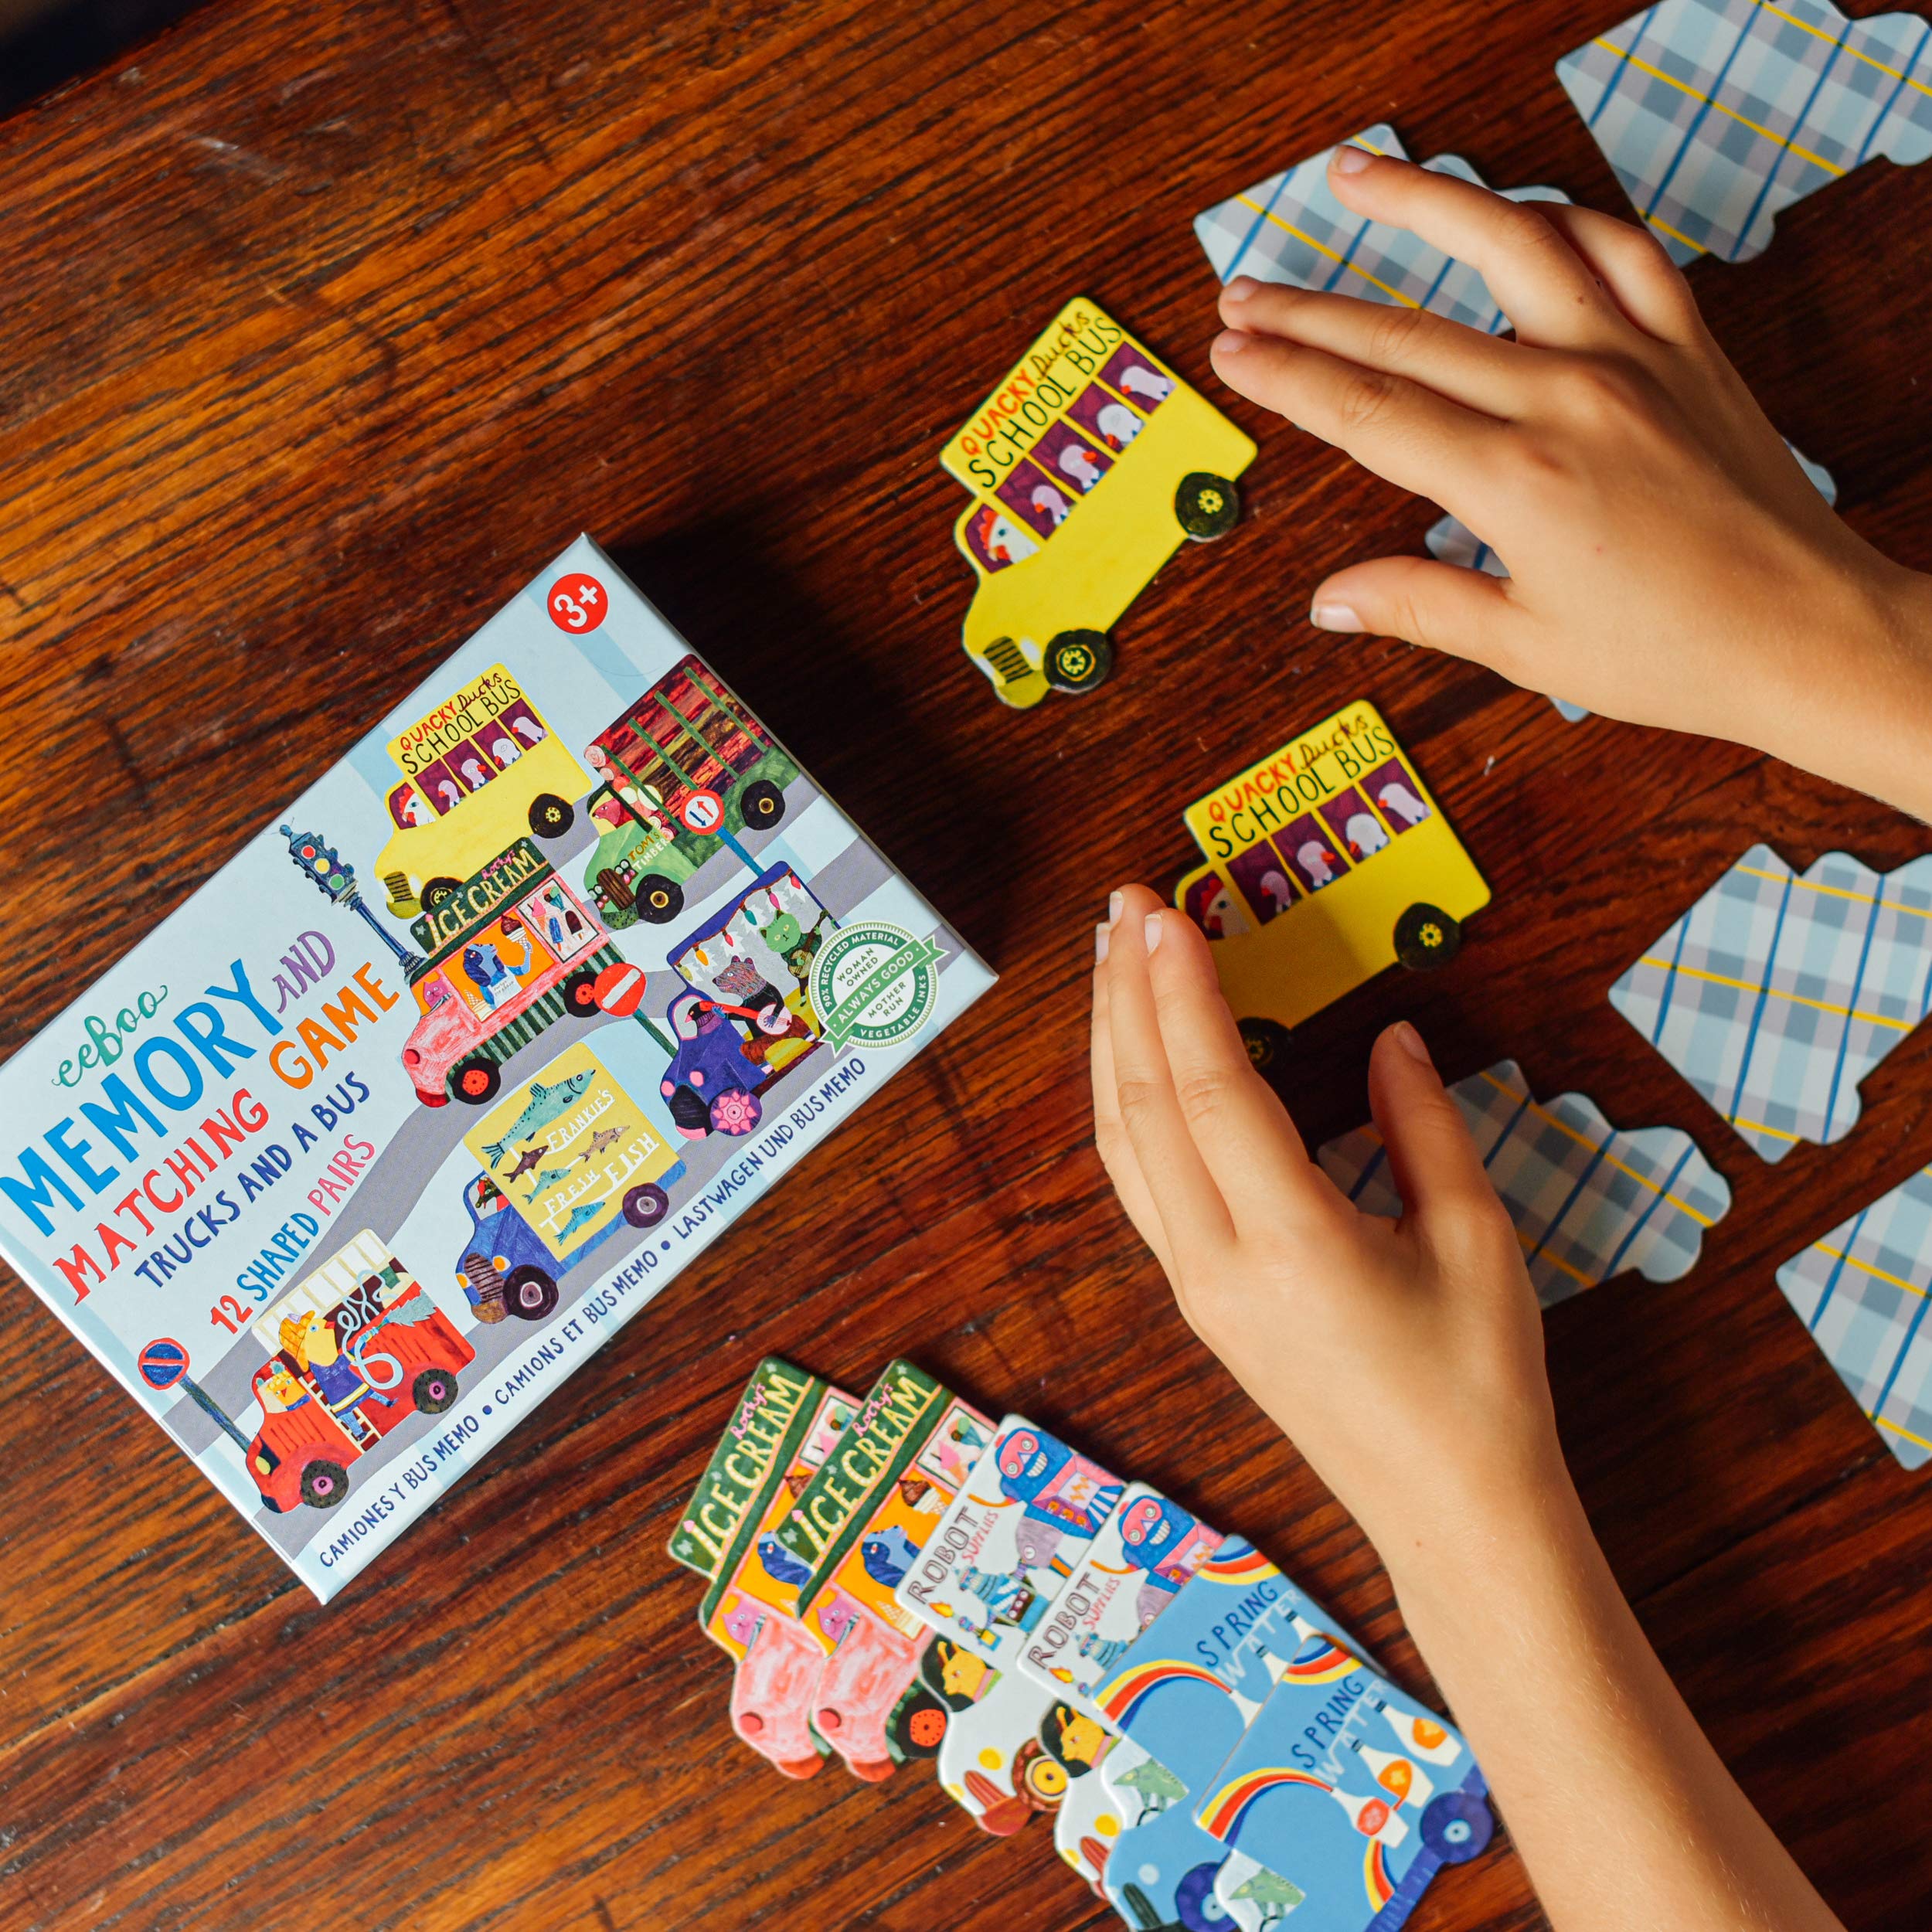 eeBoo: Trucks and a Bus Little Memory Matching Game, Developmental and Educational, Sharpens Recognition, Concentration and Memory, Perfect for Ages 3 and up